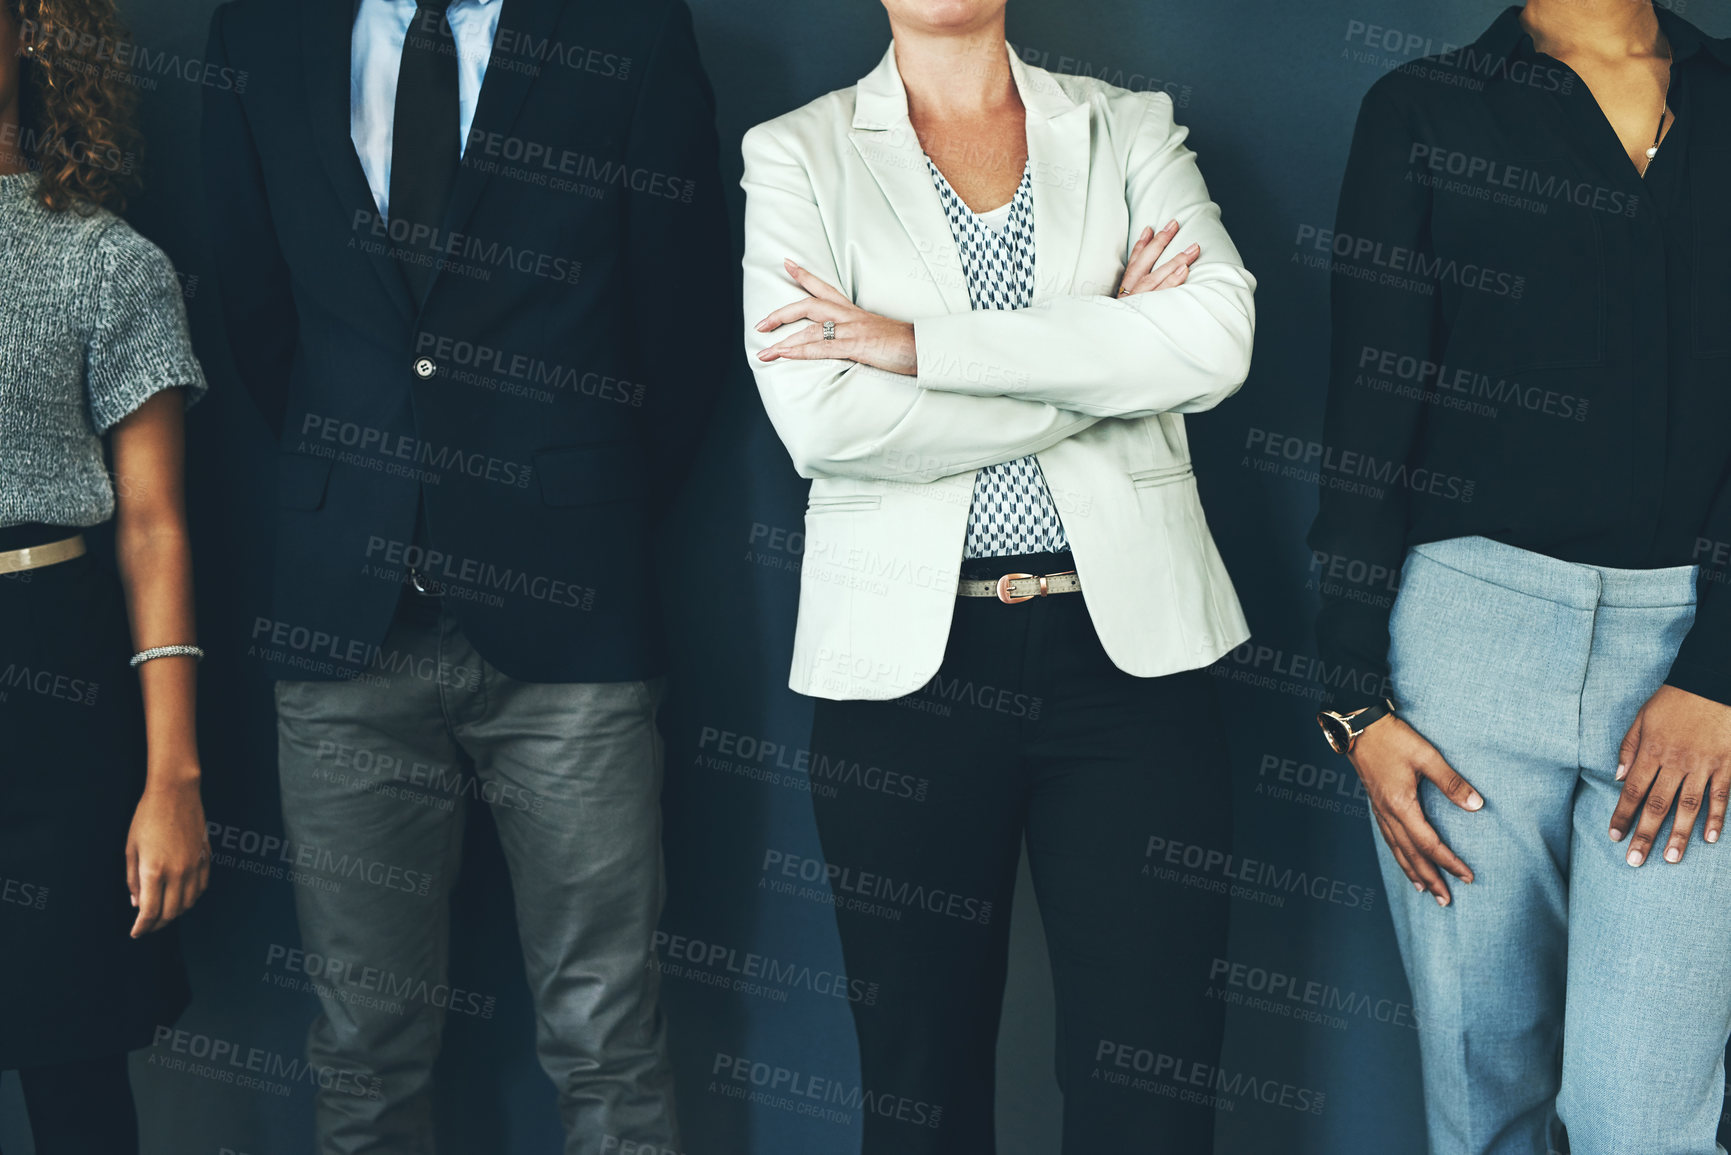 Buy stock photo Studio shot of a group of unrecognisable businesspeople posing against a dark background